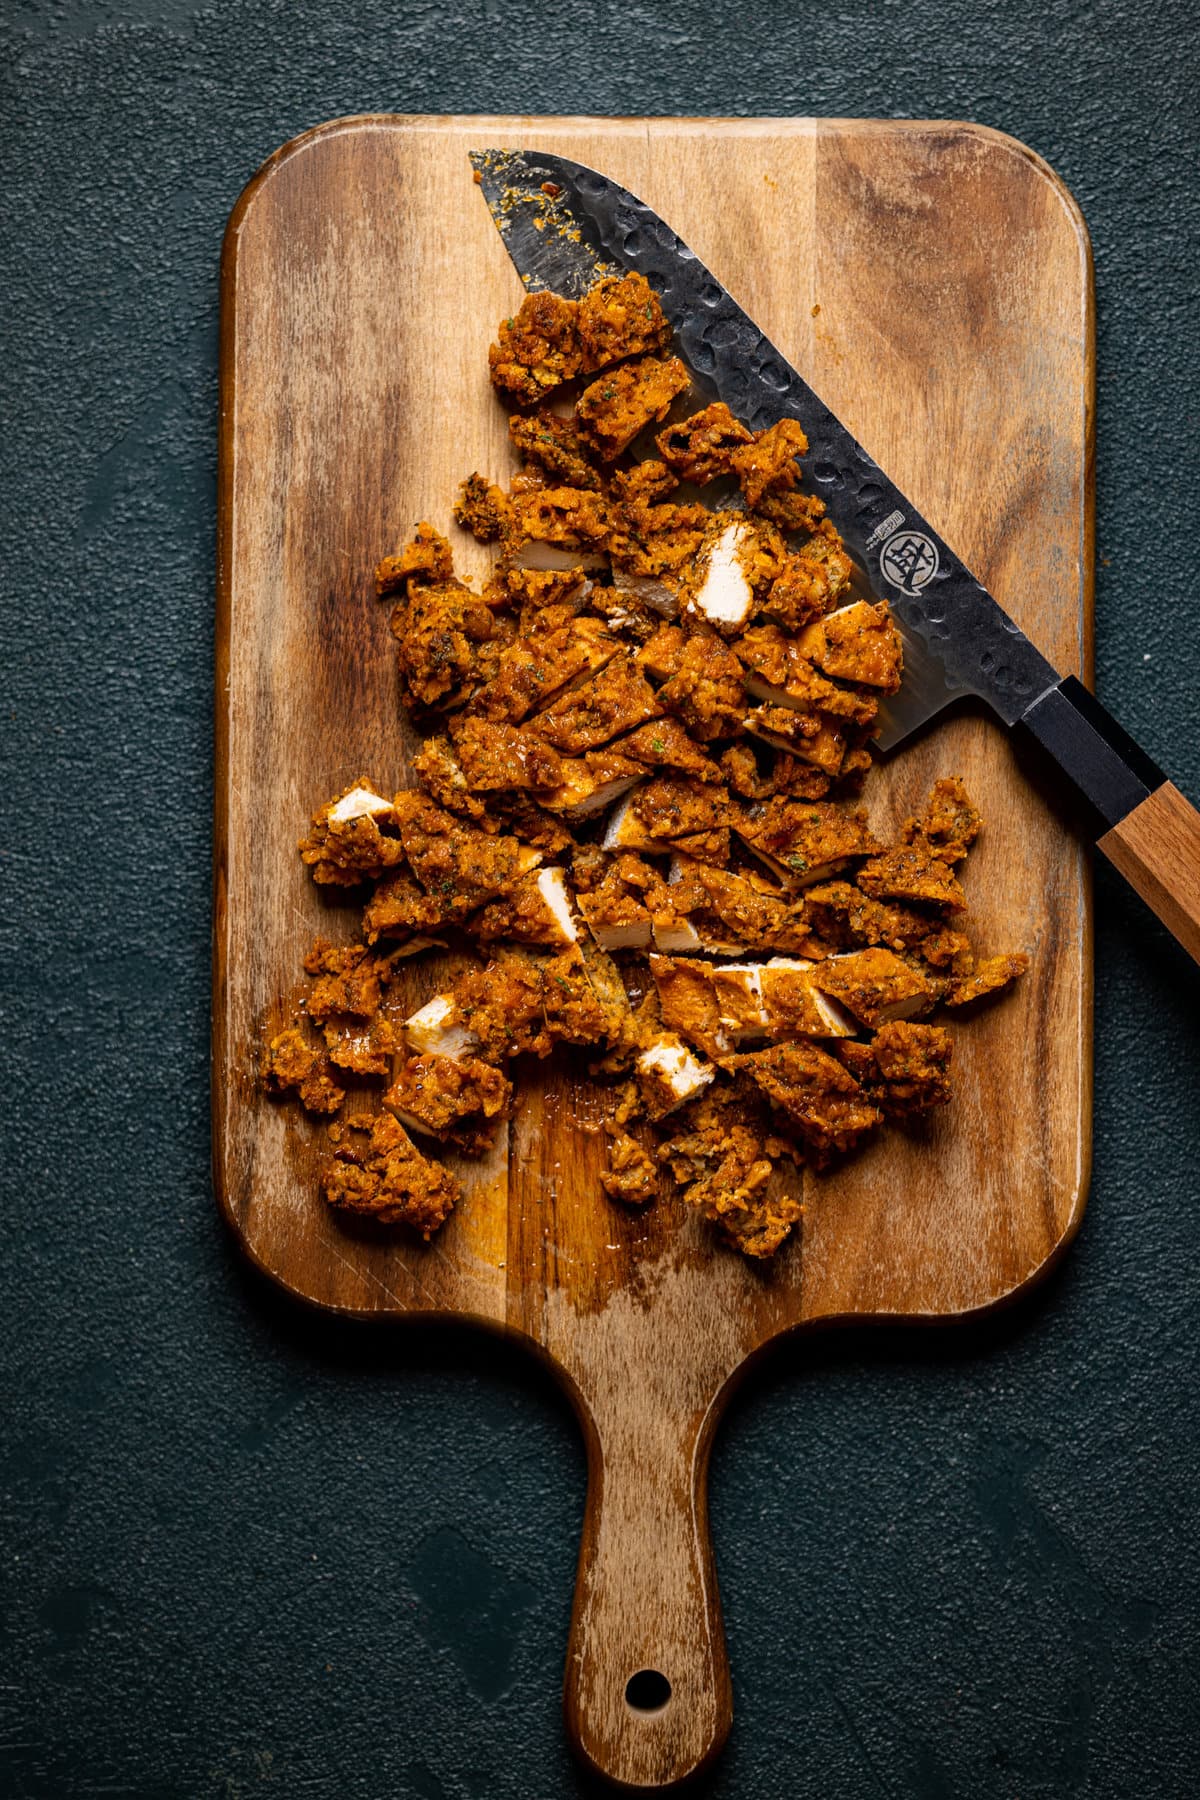 Chopped chicken on a cutting board with a knife